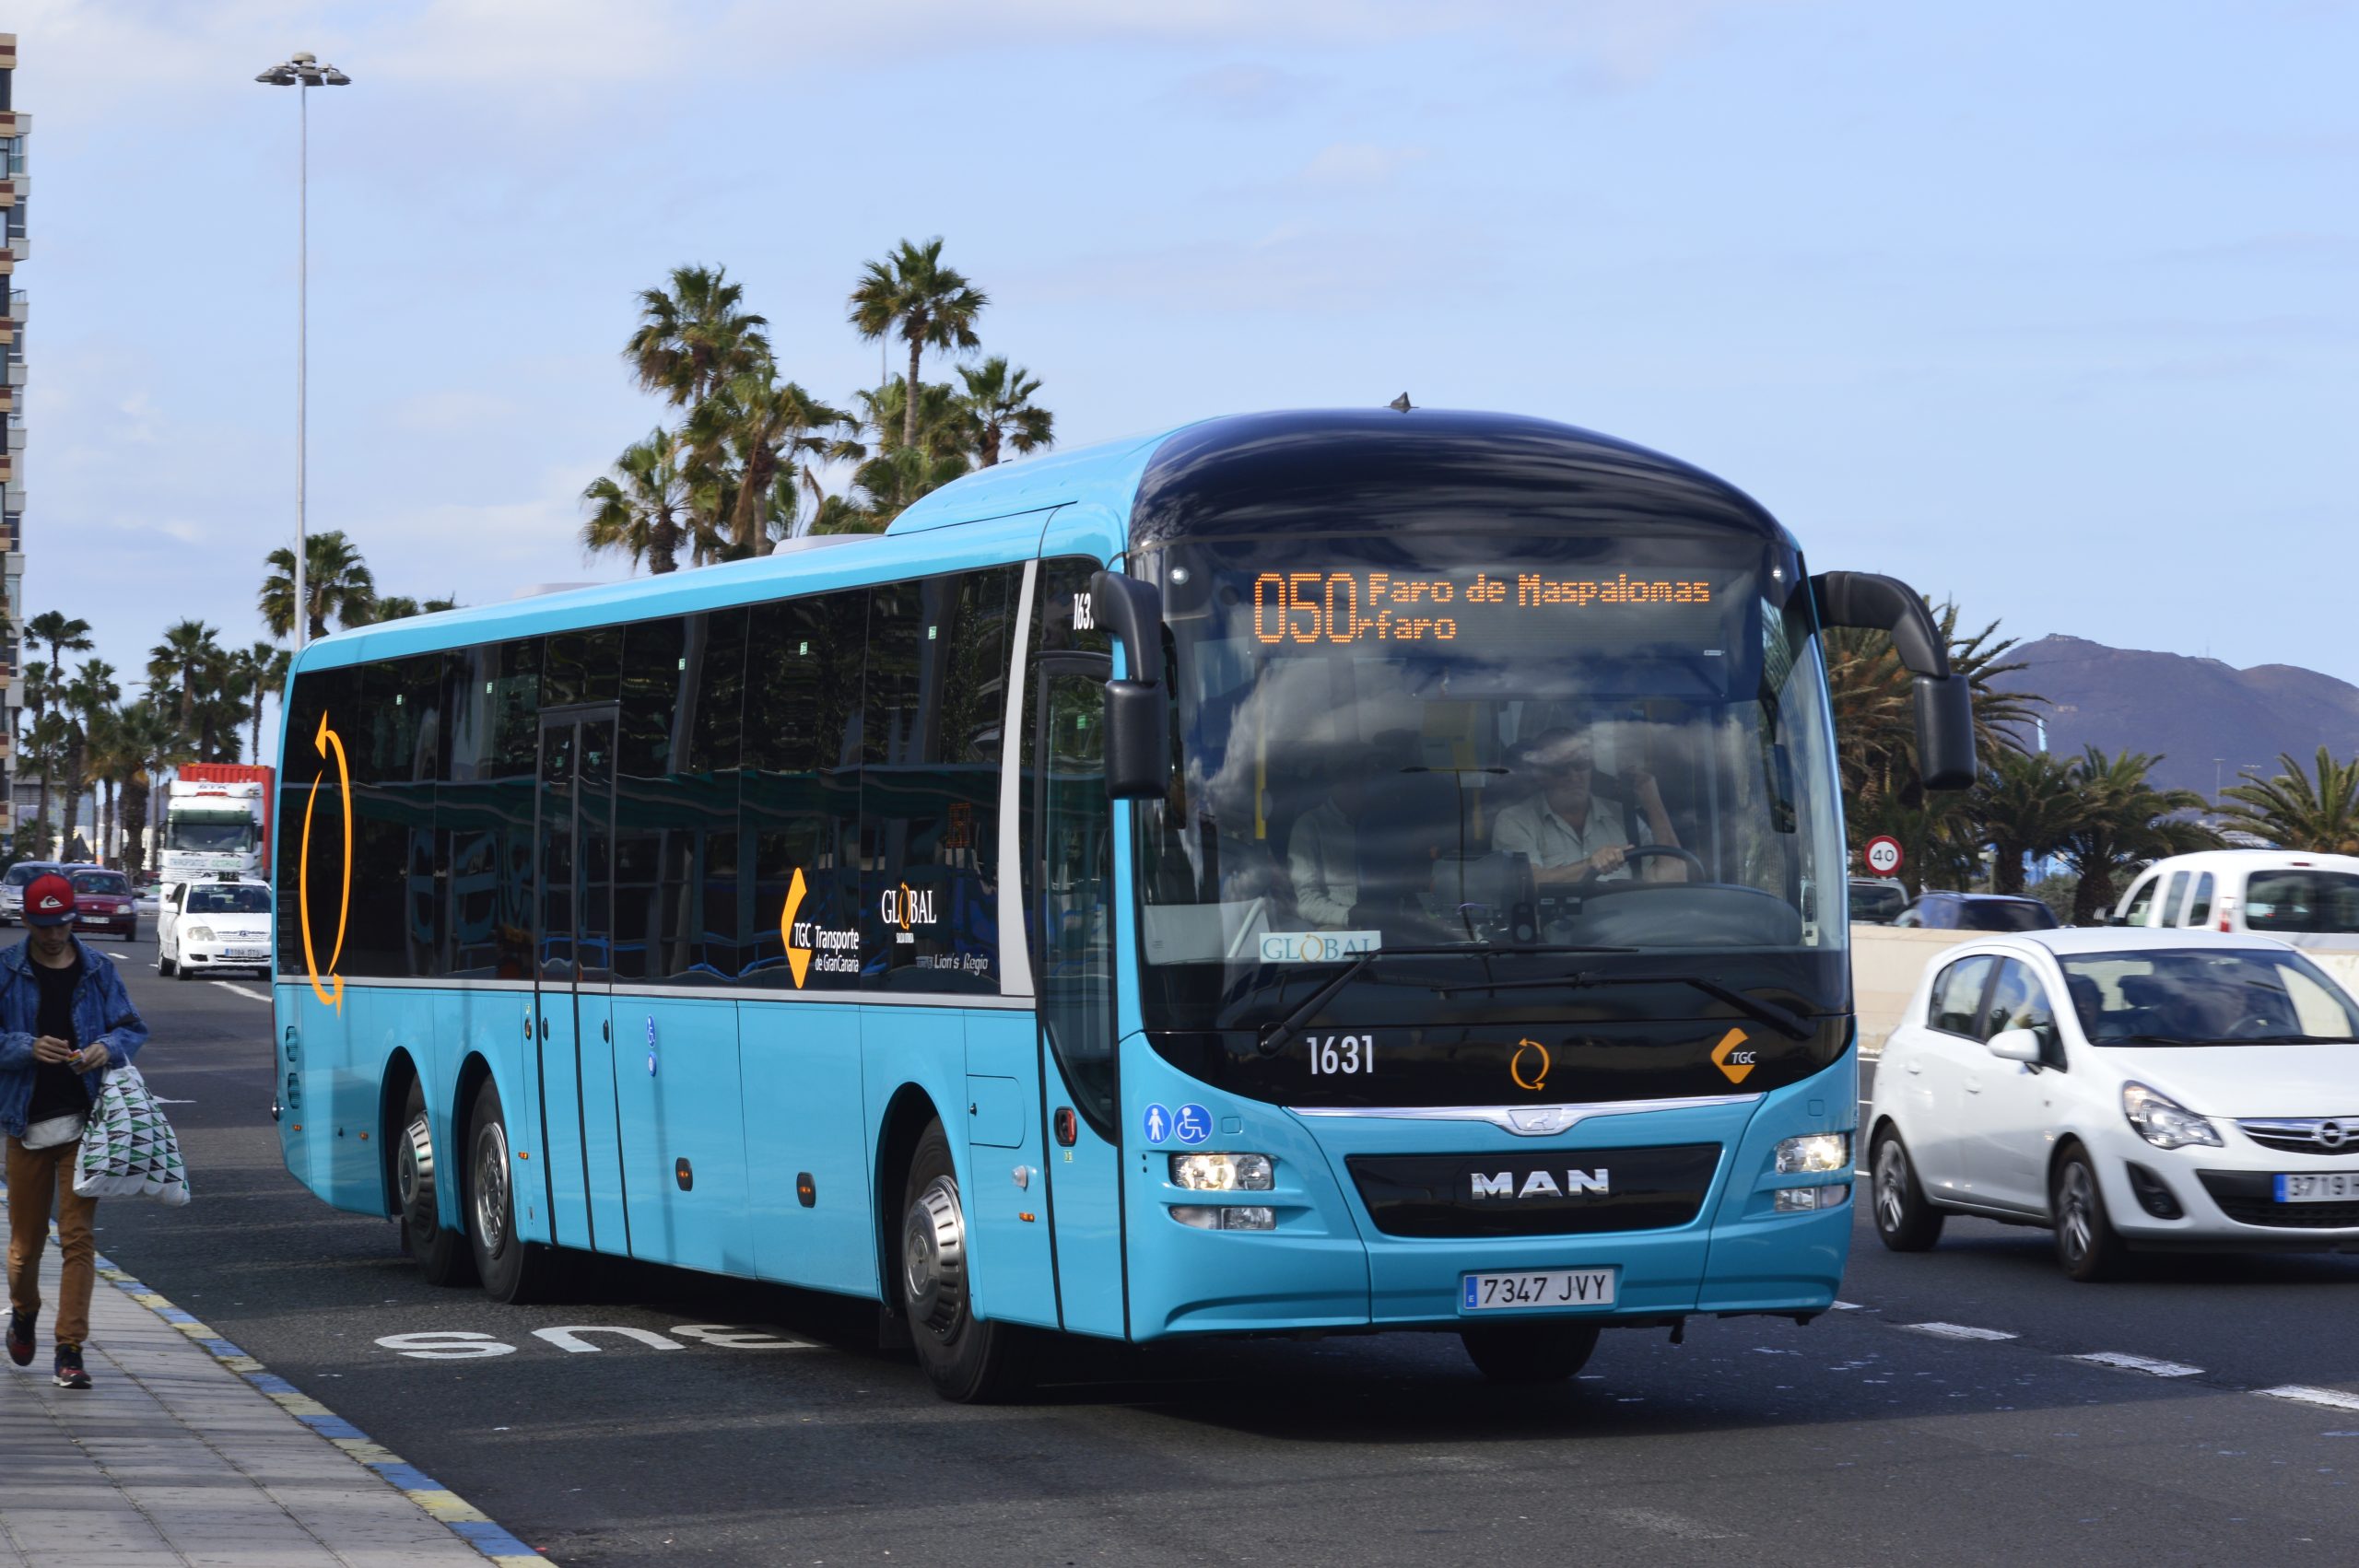 How To Get From Gran Canaria Airport To City Center - All Possible Ways, Gran Canaria Bus Airport, How To Get From Gran Canaria Airport To Las Palmas - All Possible Ways, cheapest way from Gran Canaria airport to Las Palmas, Gran Canaria airport to Las Palmas, Gran Canaria airport to Las Palmas, Gran Canaria Bus Airport, bus from Gran Canaria airport to Las Palmas, taxi Gran Canaria airport to Las Palmas, Uber Gran Canaria airport to Las Palmas, Gran Canaria airport to Las Palmas by bus, Gran Canaria to Las Palmas, Las Palmas airport to Las Palmas, GRAN CANARIA AIRPORT TO LAS PALMAS
